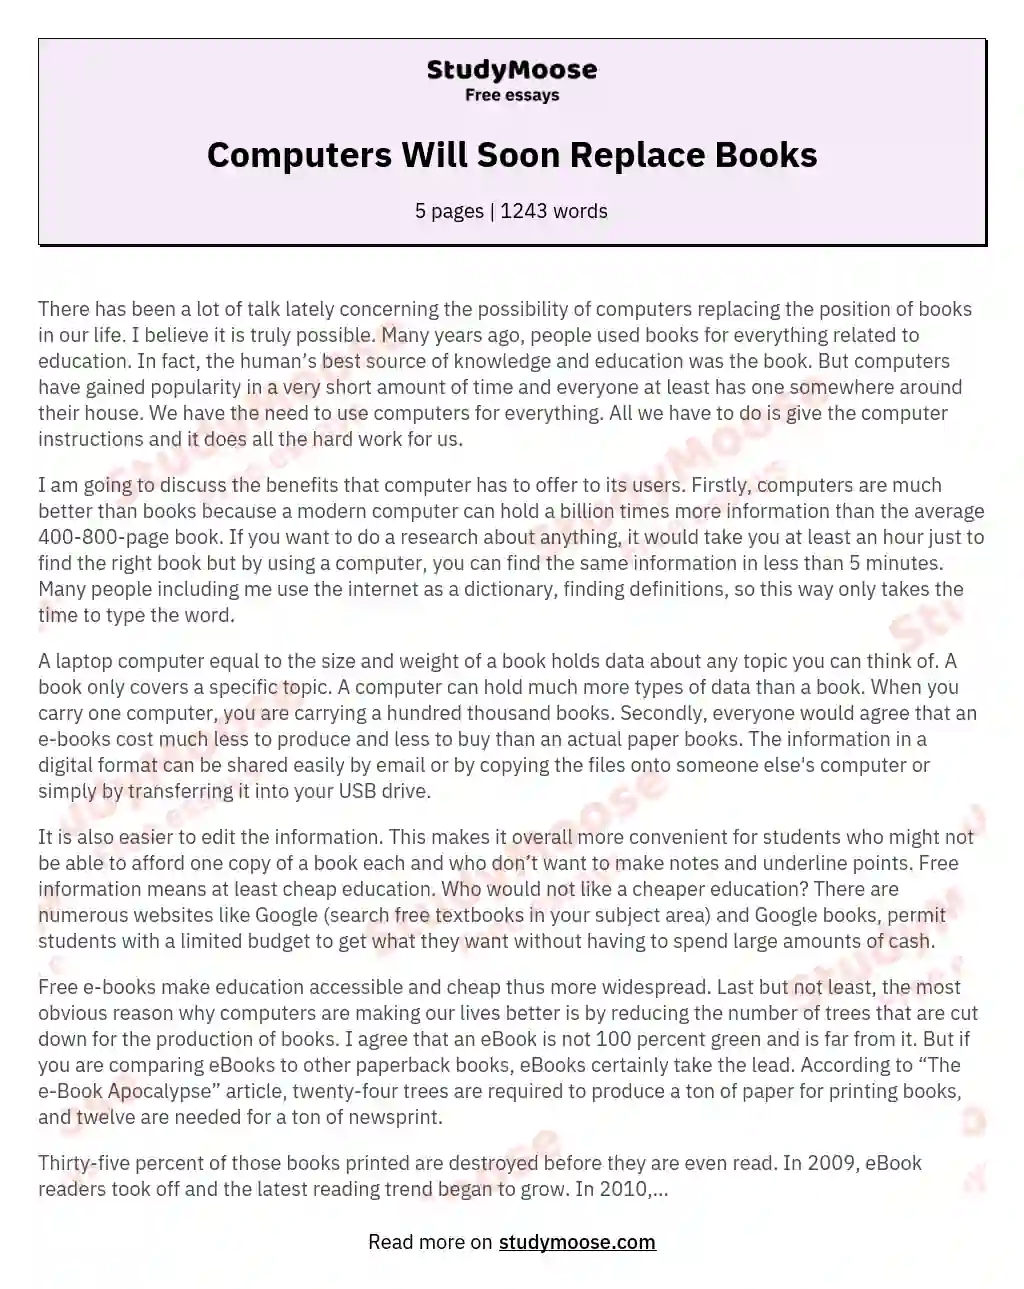 Computers Will Soon Replace Books essay